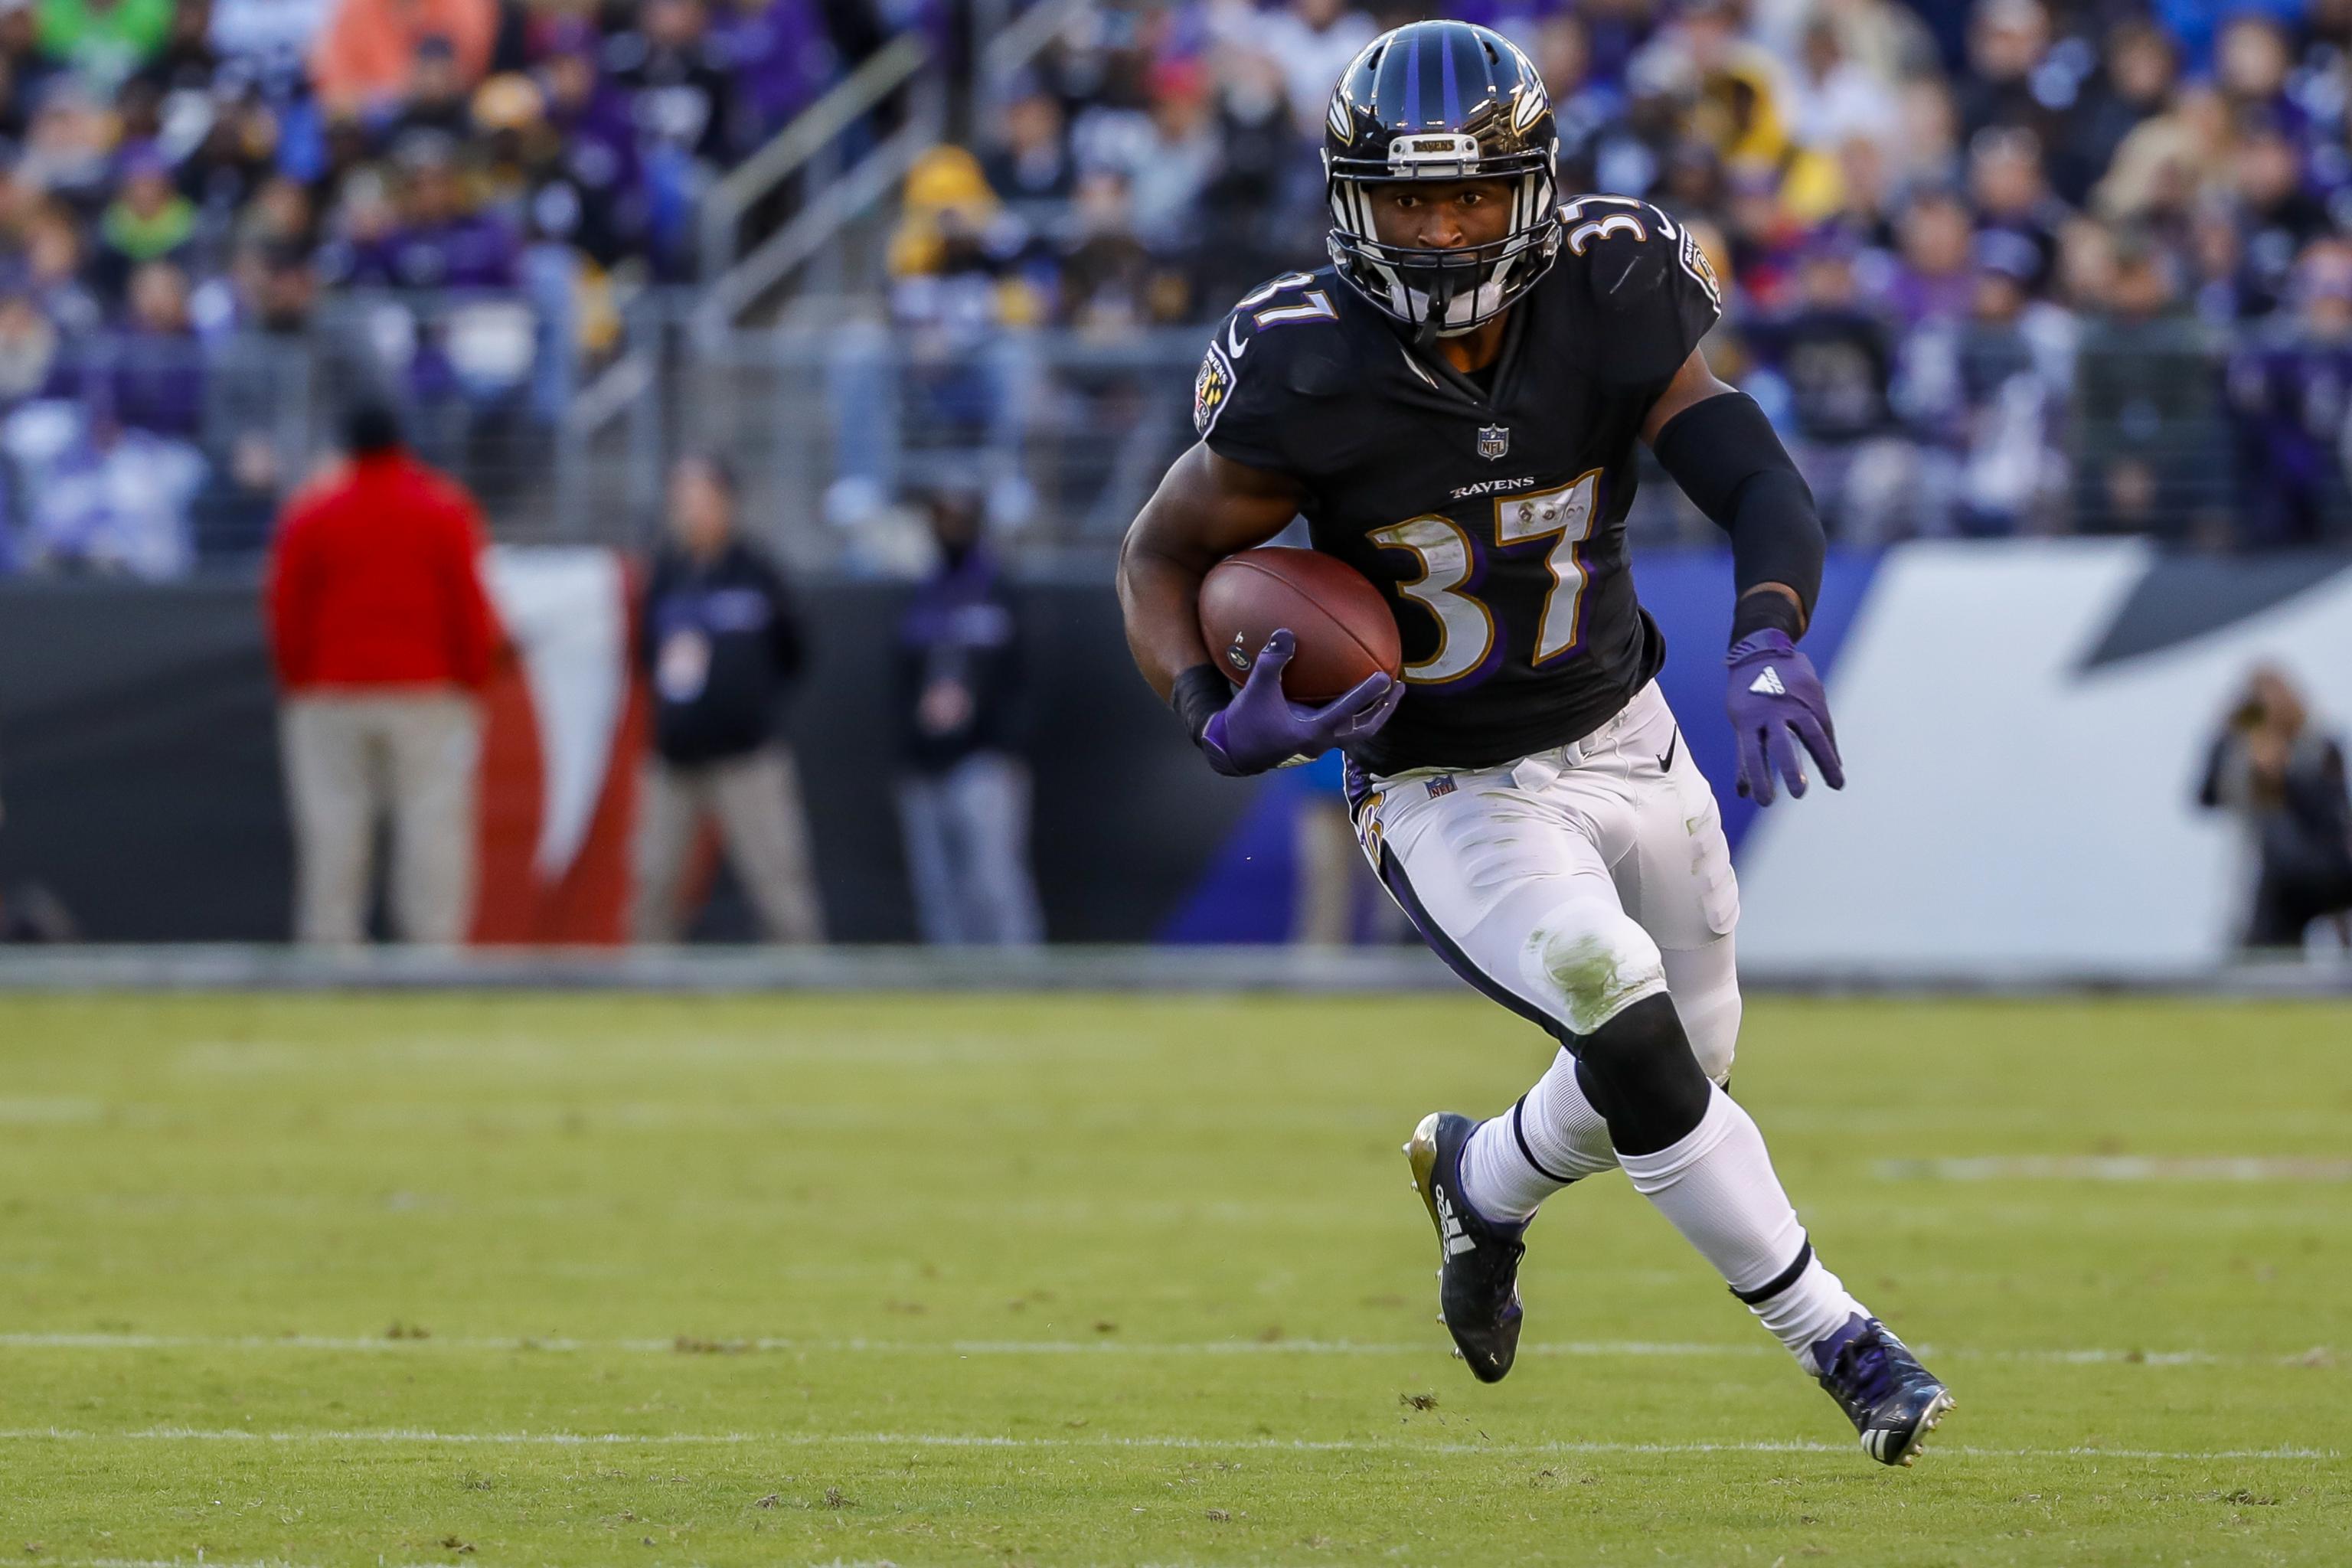 Saints News: RB Javorius Allen Signs Contract After 4 Years with